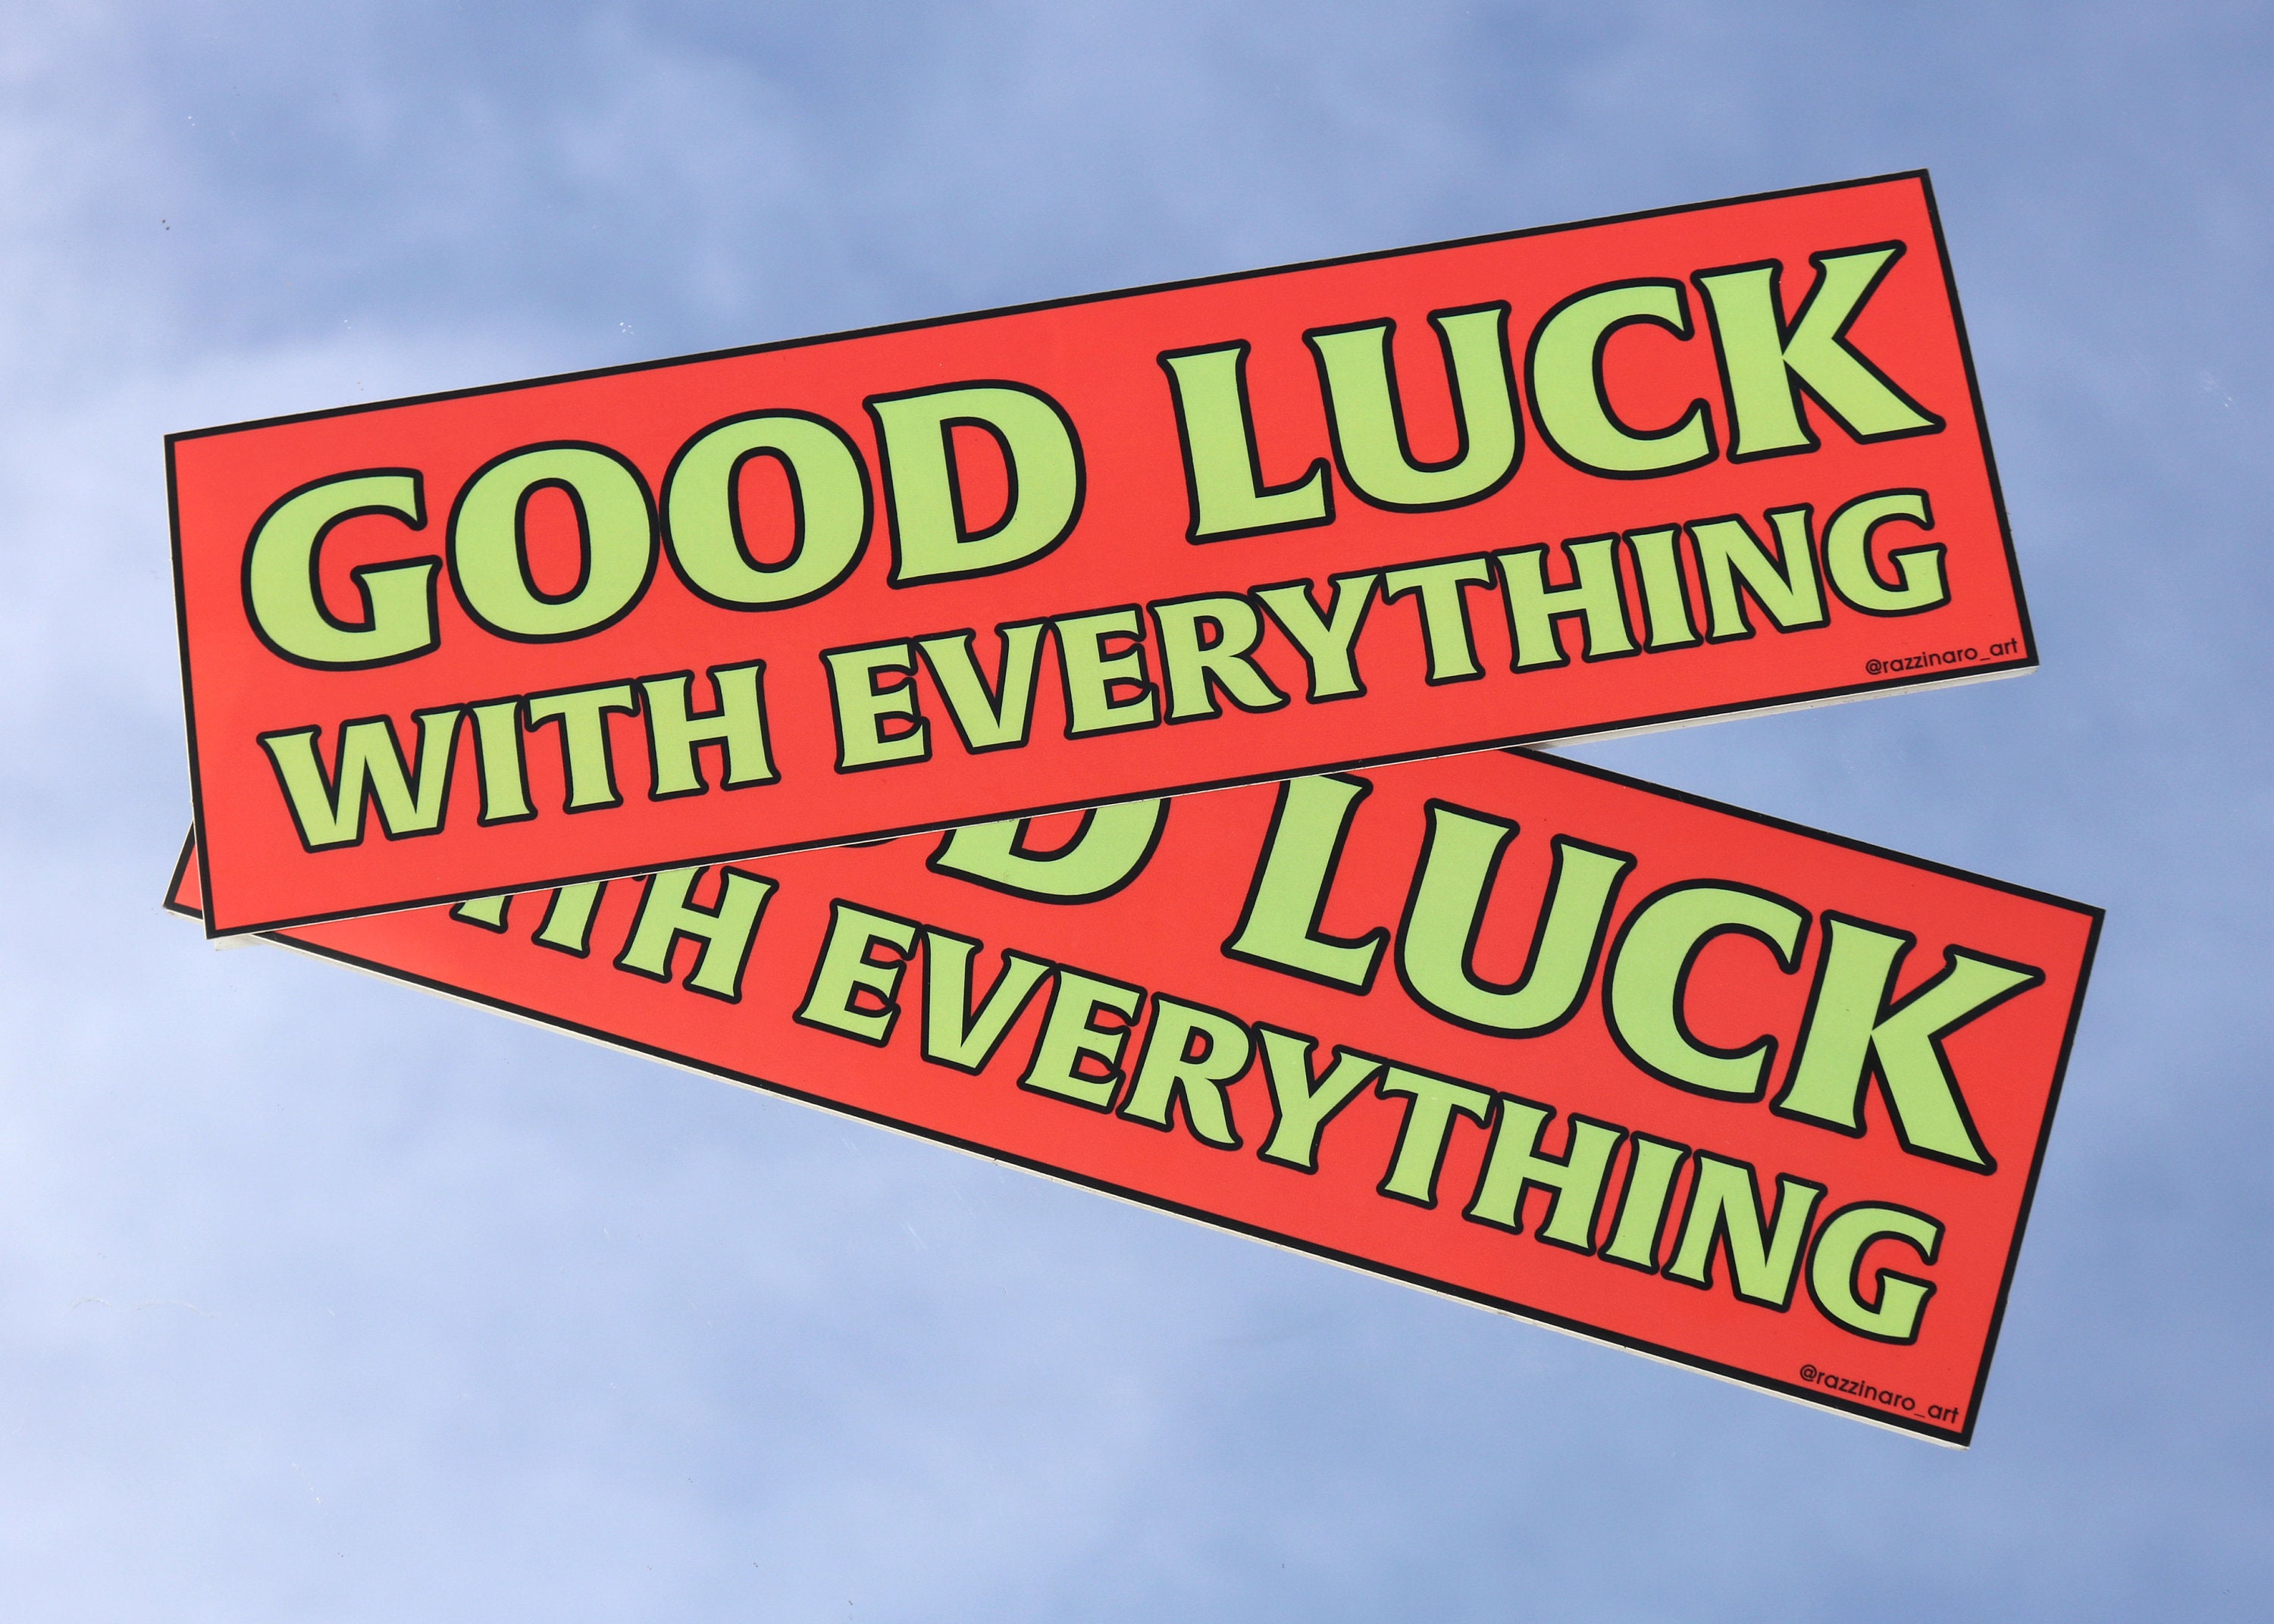 Good Luck With Everything Bumper Sticker Car Decal 3x10 